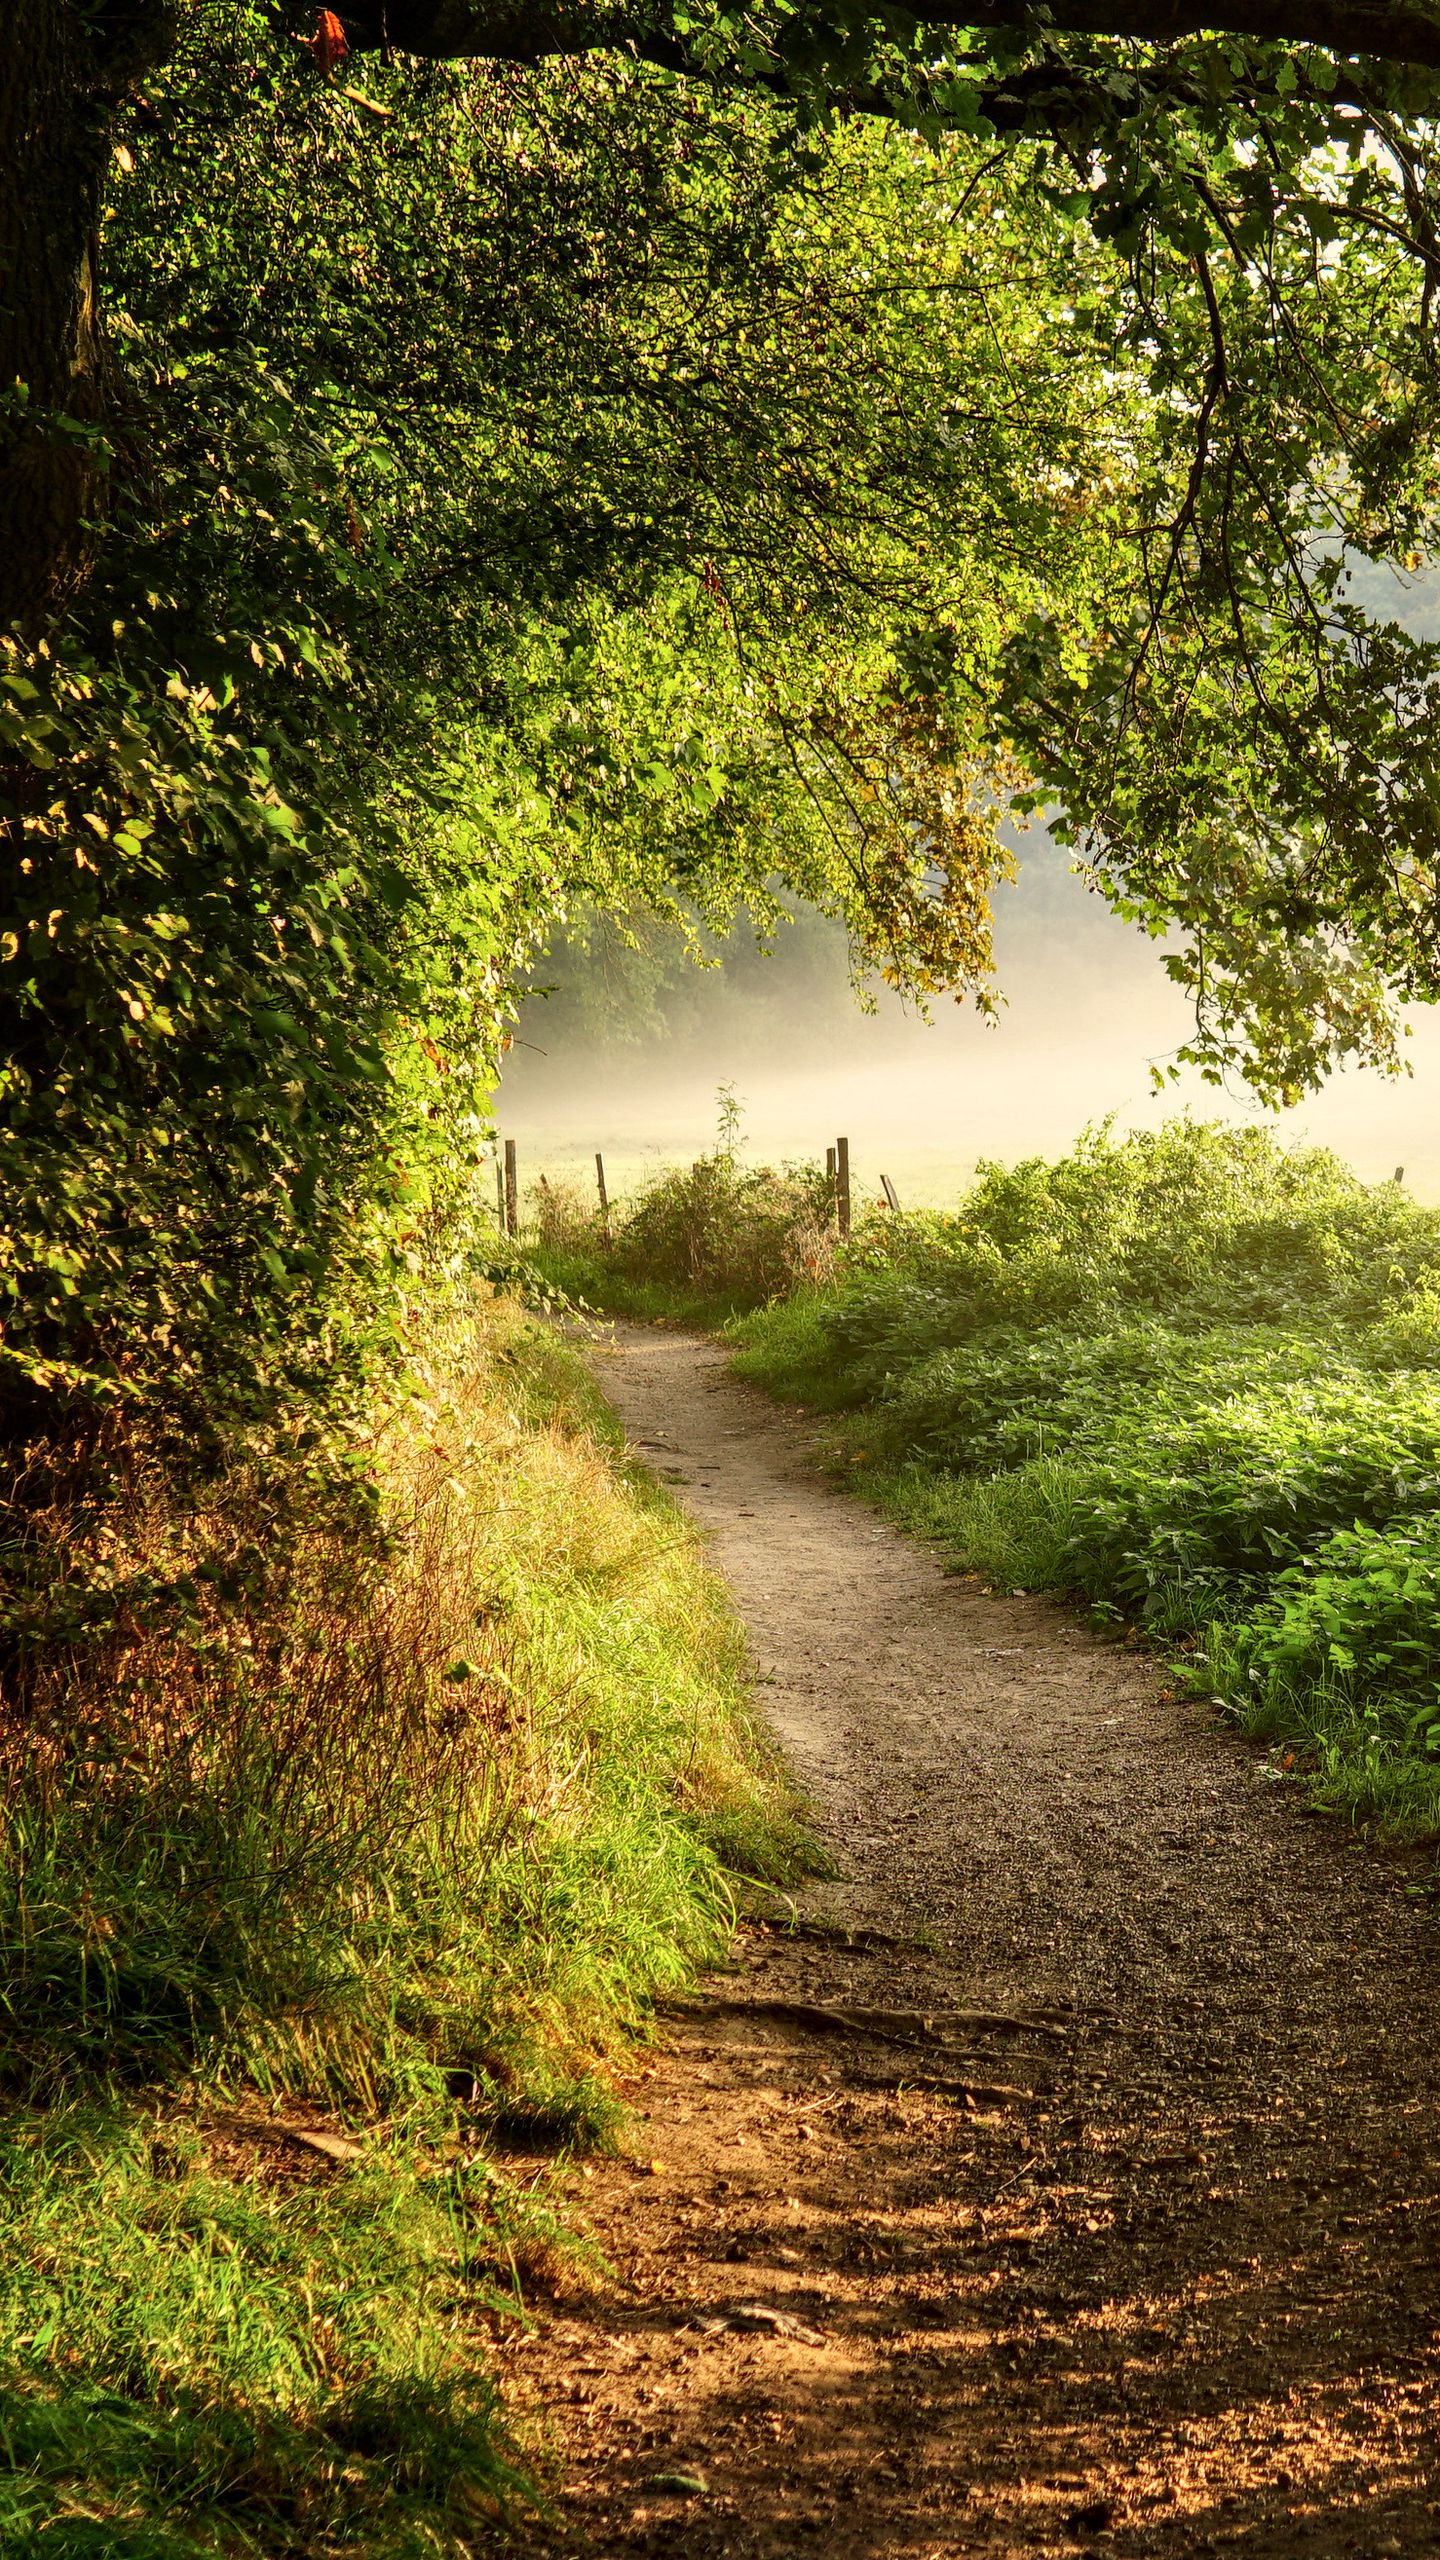 Download wallpaper 1440x2560 path, forest, trees, bushes, grass qhd samsung  galaxy s6, s7, edge, note, lg g4 hd background